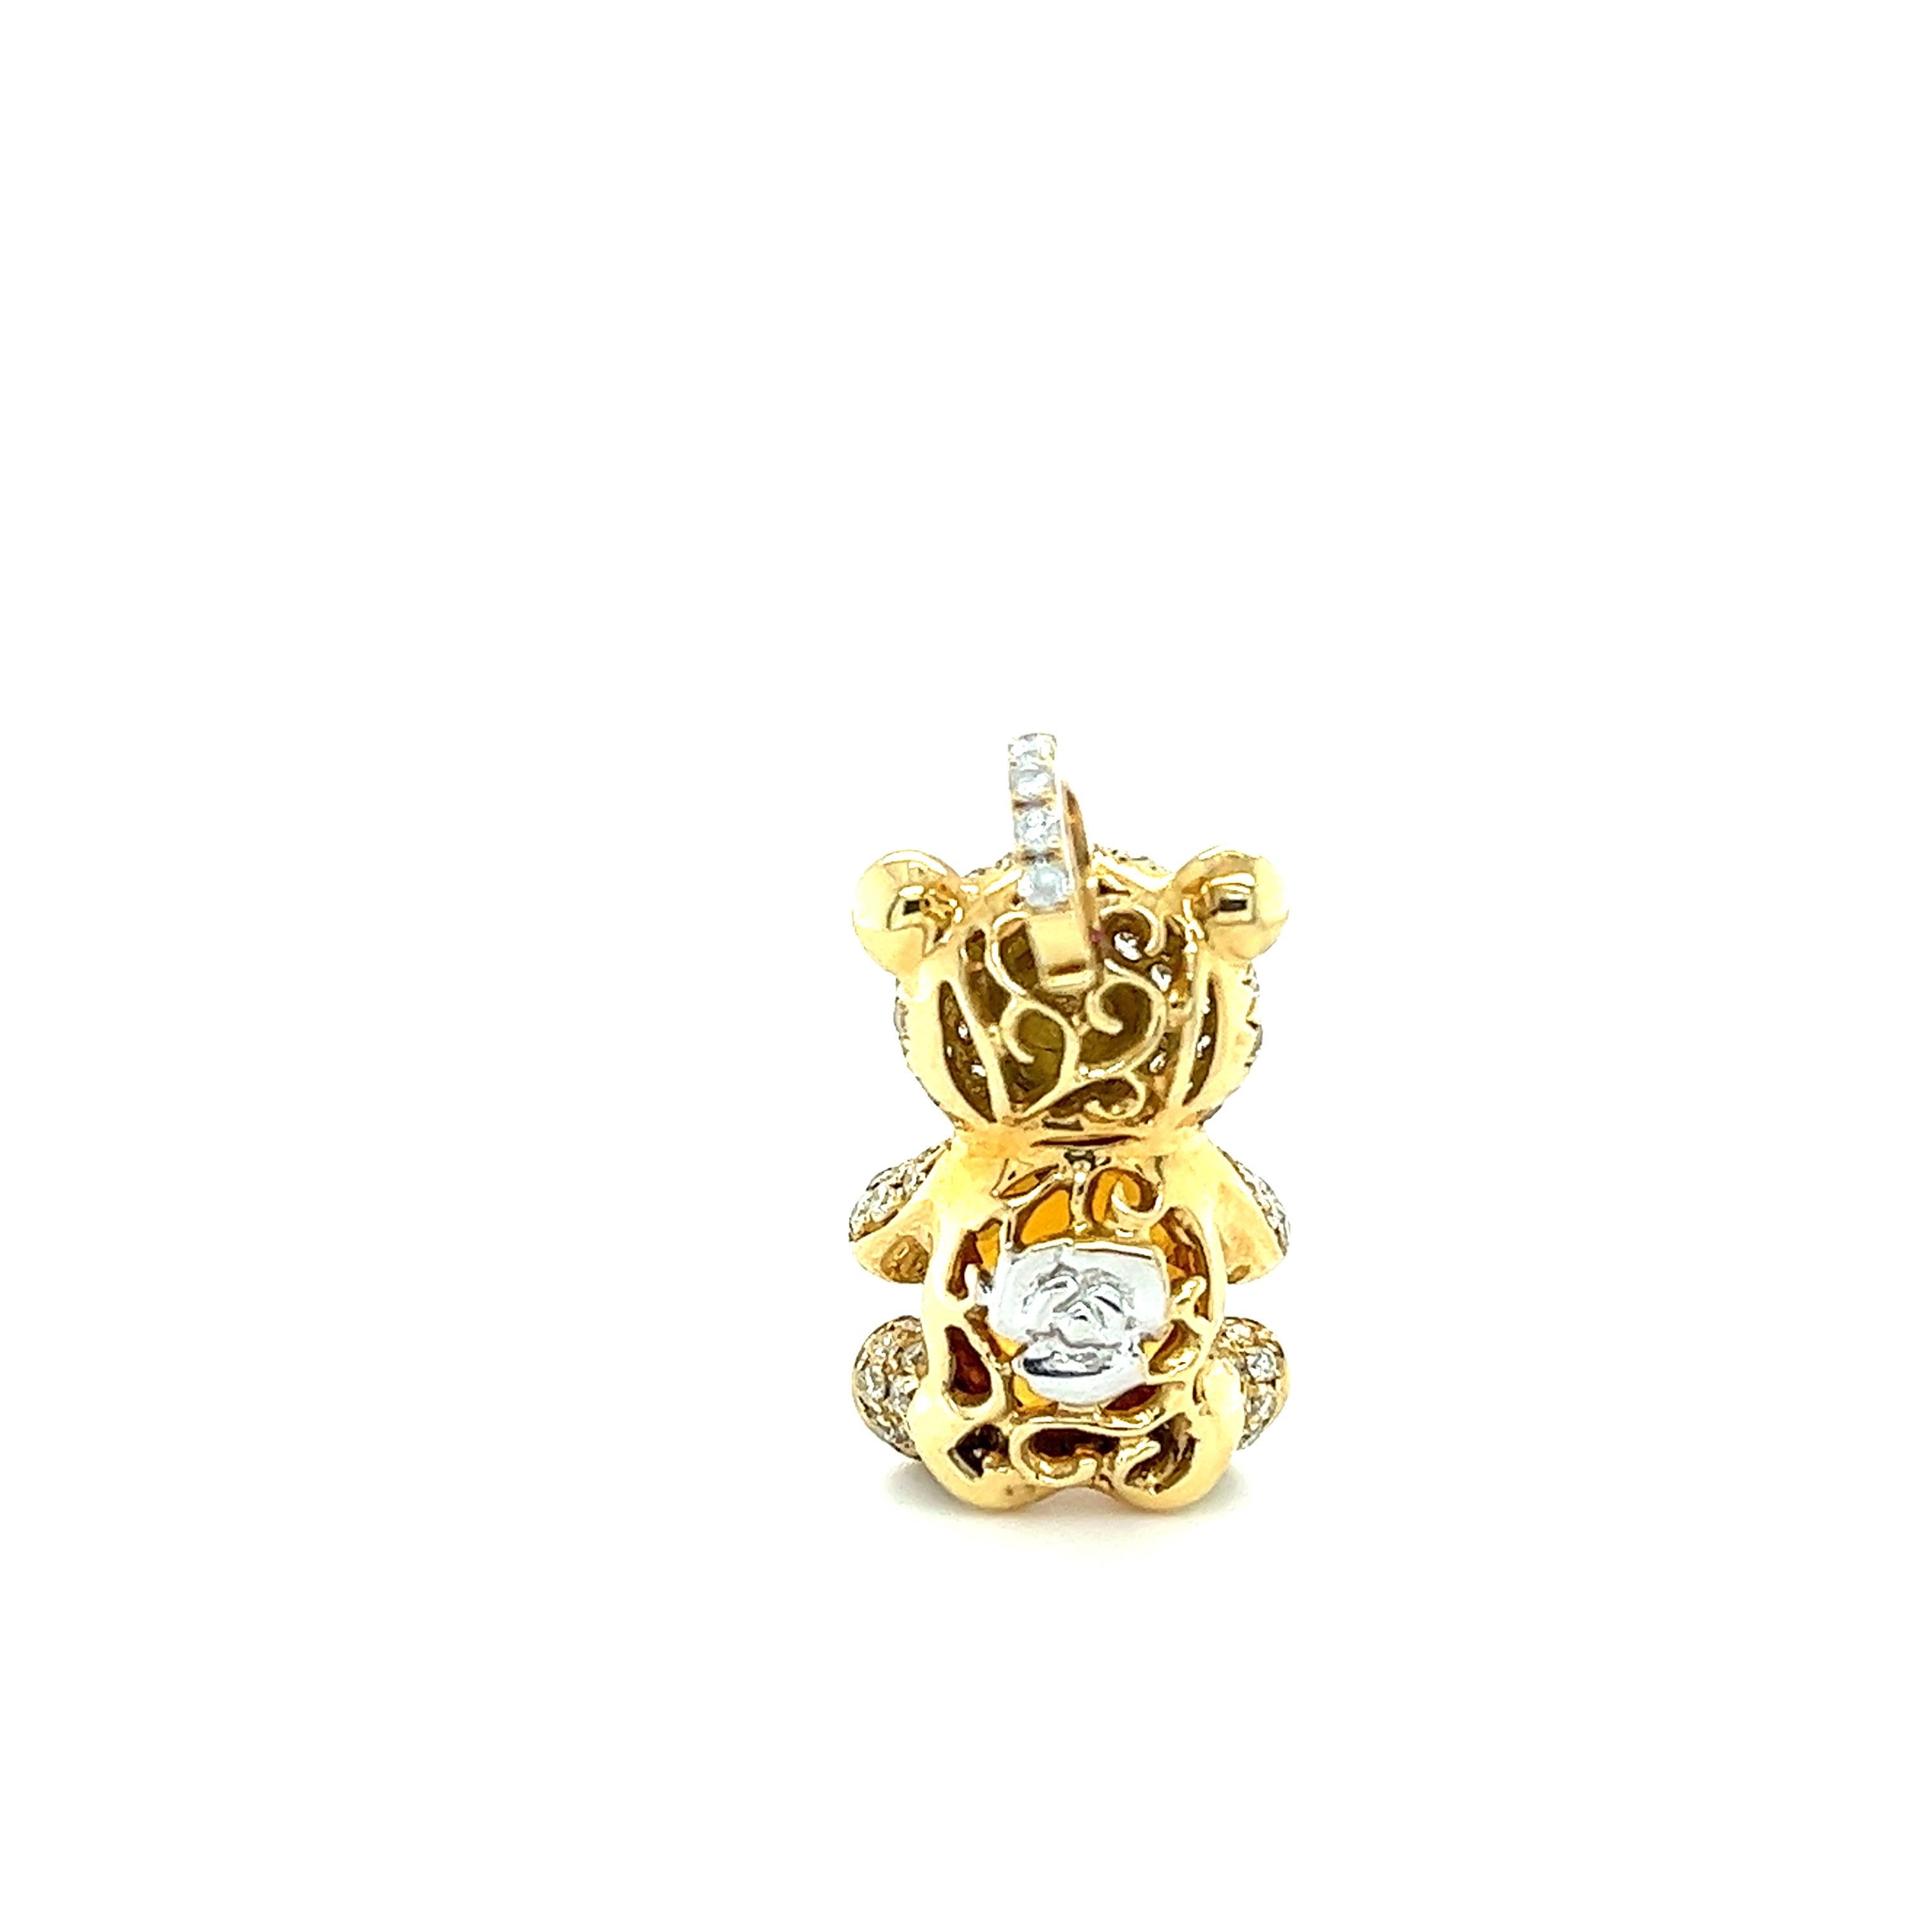 18 K Yellow Gold Bear Citrine Pendant

1 Citrine 3.05 CT
9 Diamonds 0.08 CT
95 Fancy Diamonds 0.98 CT
2 Rubies 0.03 CT
18 K Yellow Gold 5.35 GM

Sweet Citrine seems soaked in gold and is a glorious gem for those who need a pick me up. Dressed in